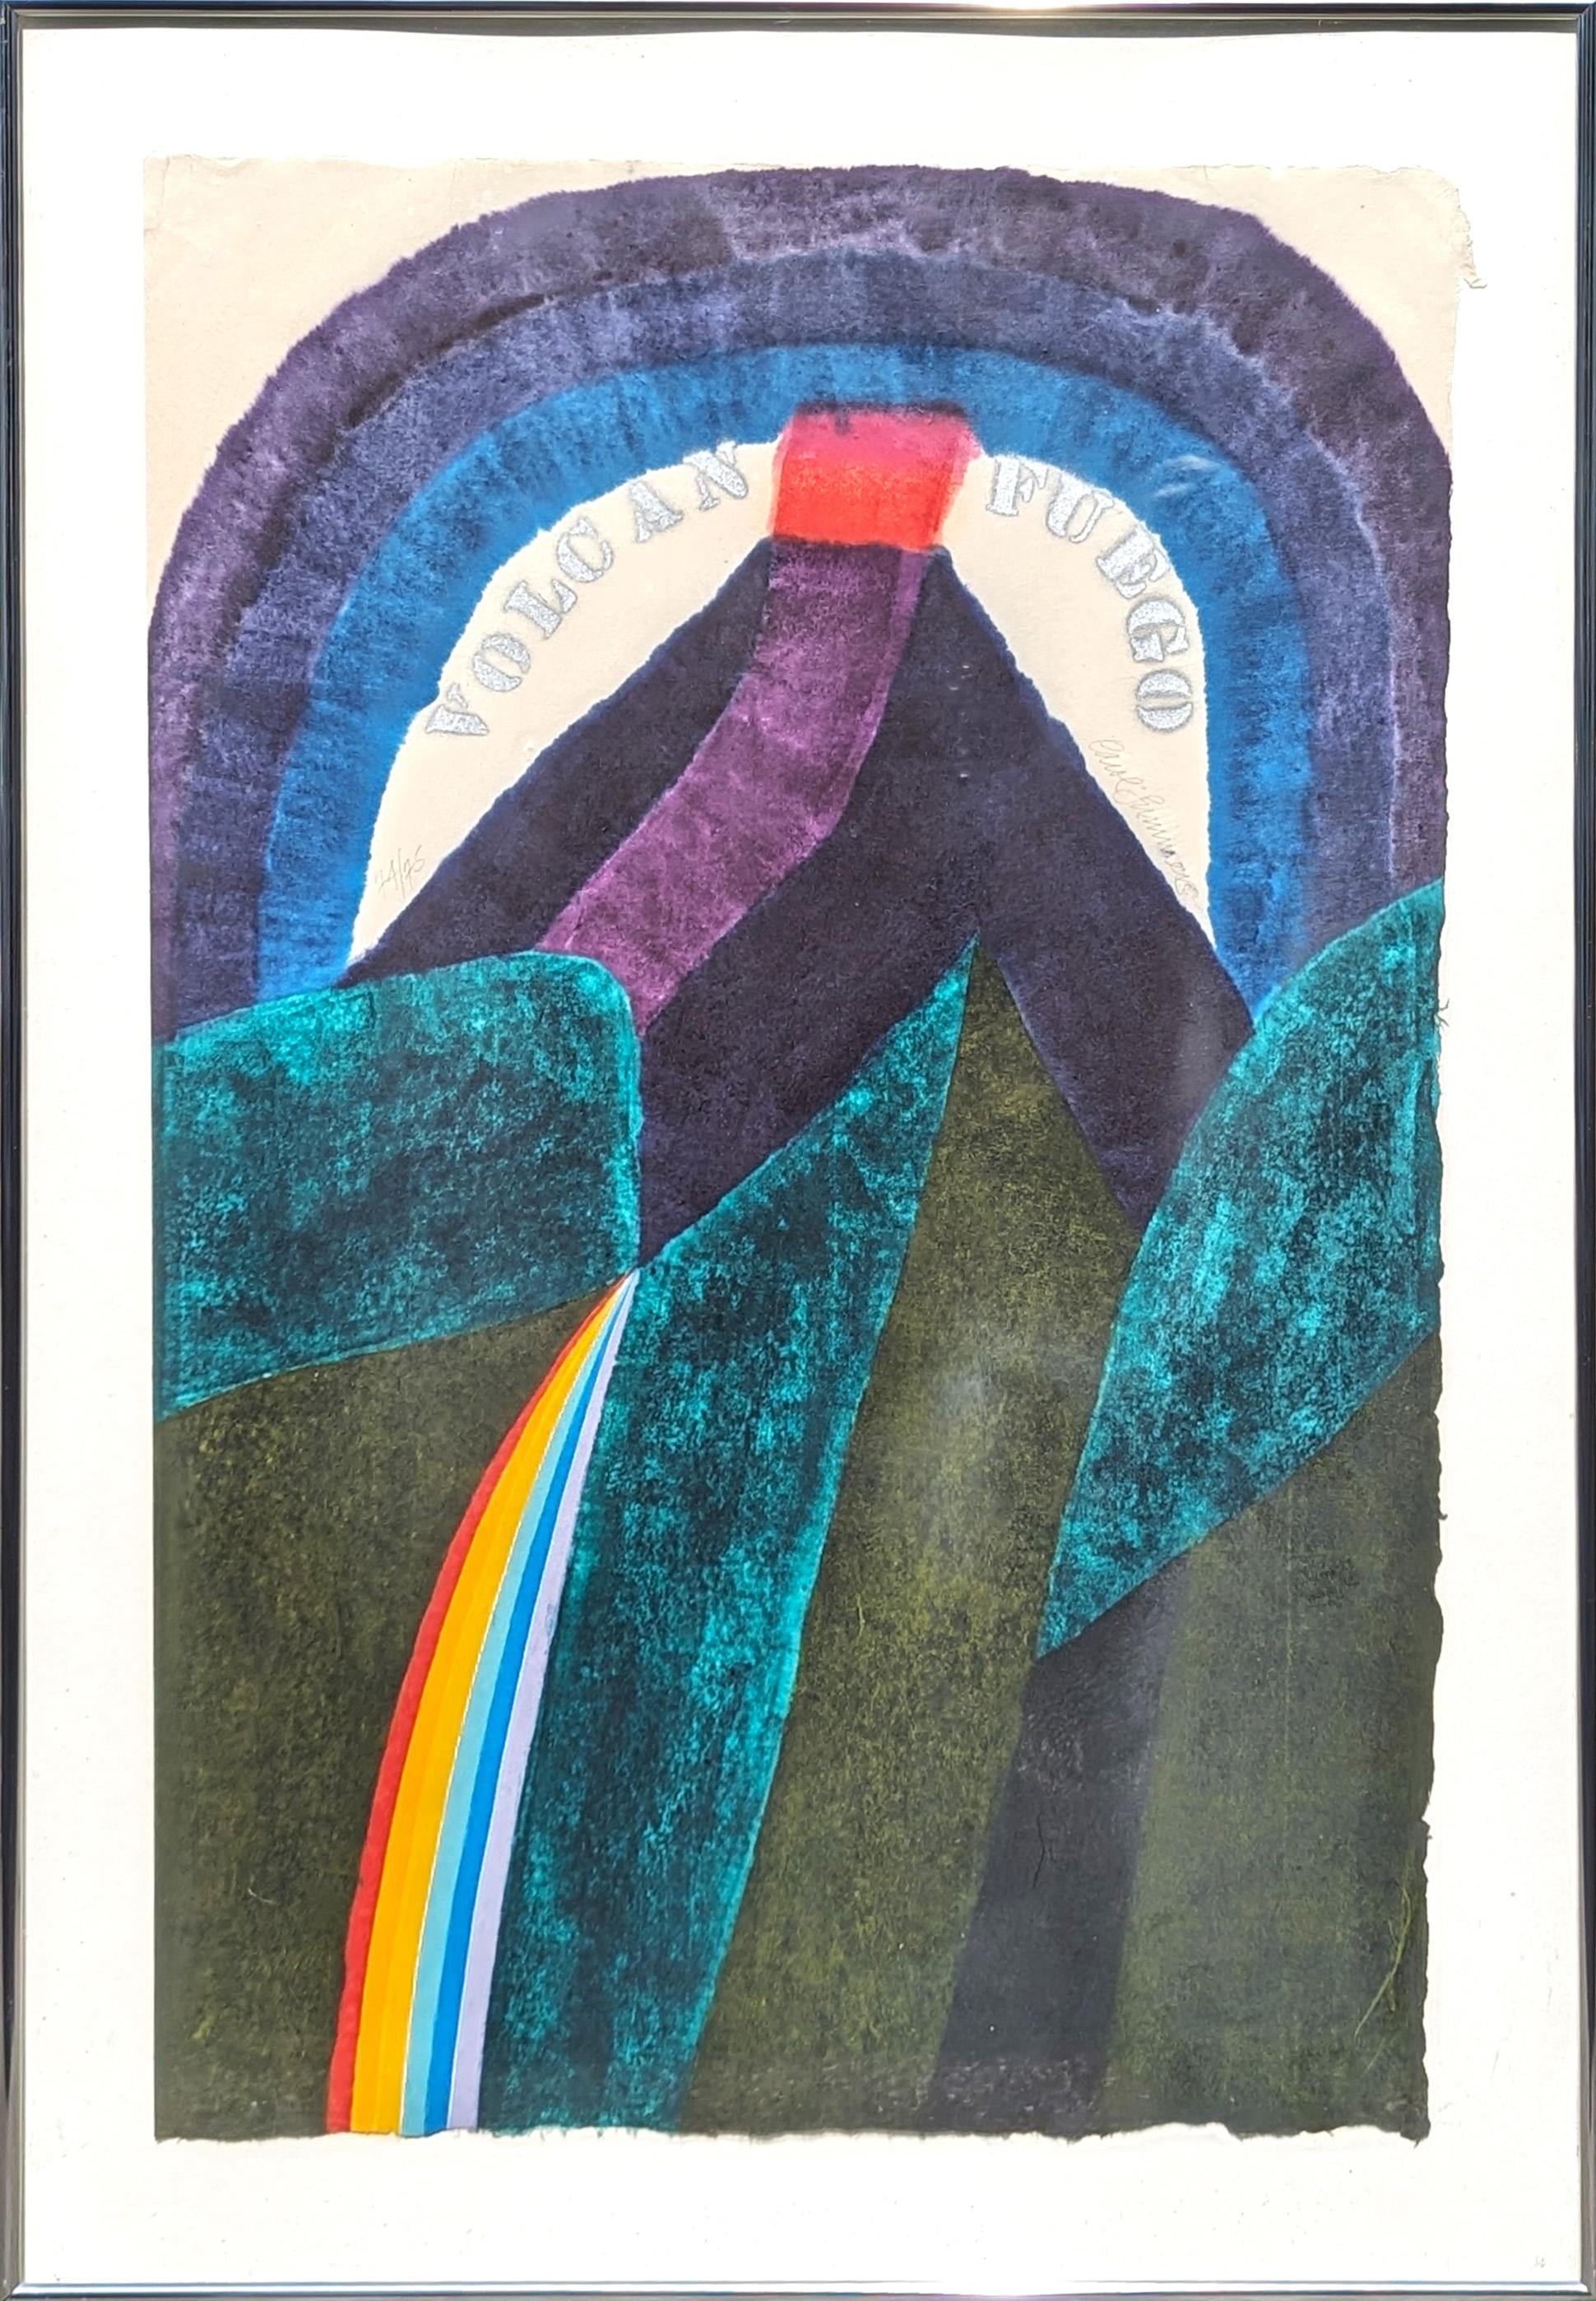 “Volcano Fuego” Modern Colorful Abstract Landscape Woodcut Print Ed. 74/75